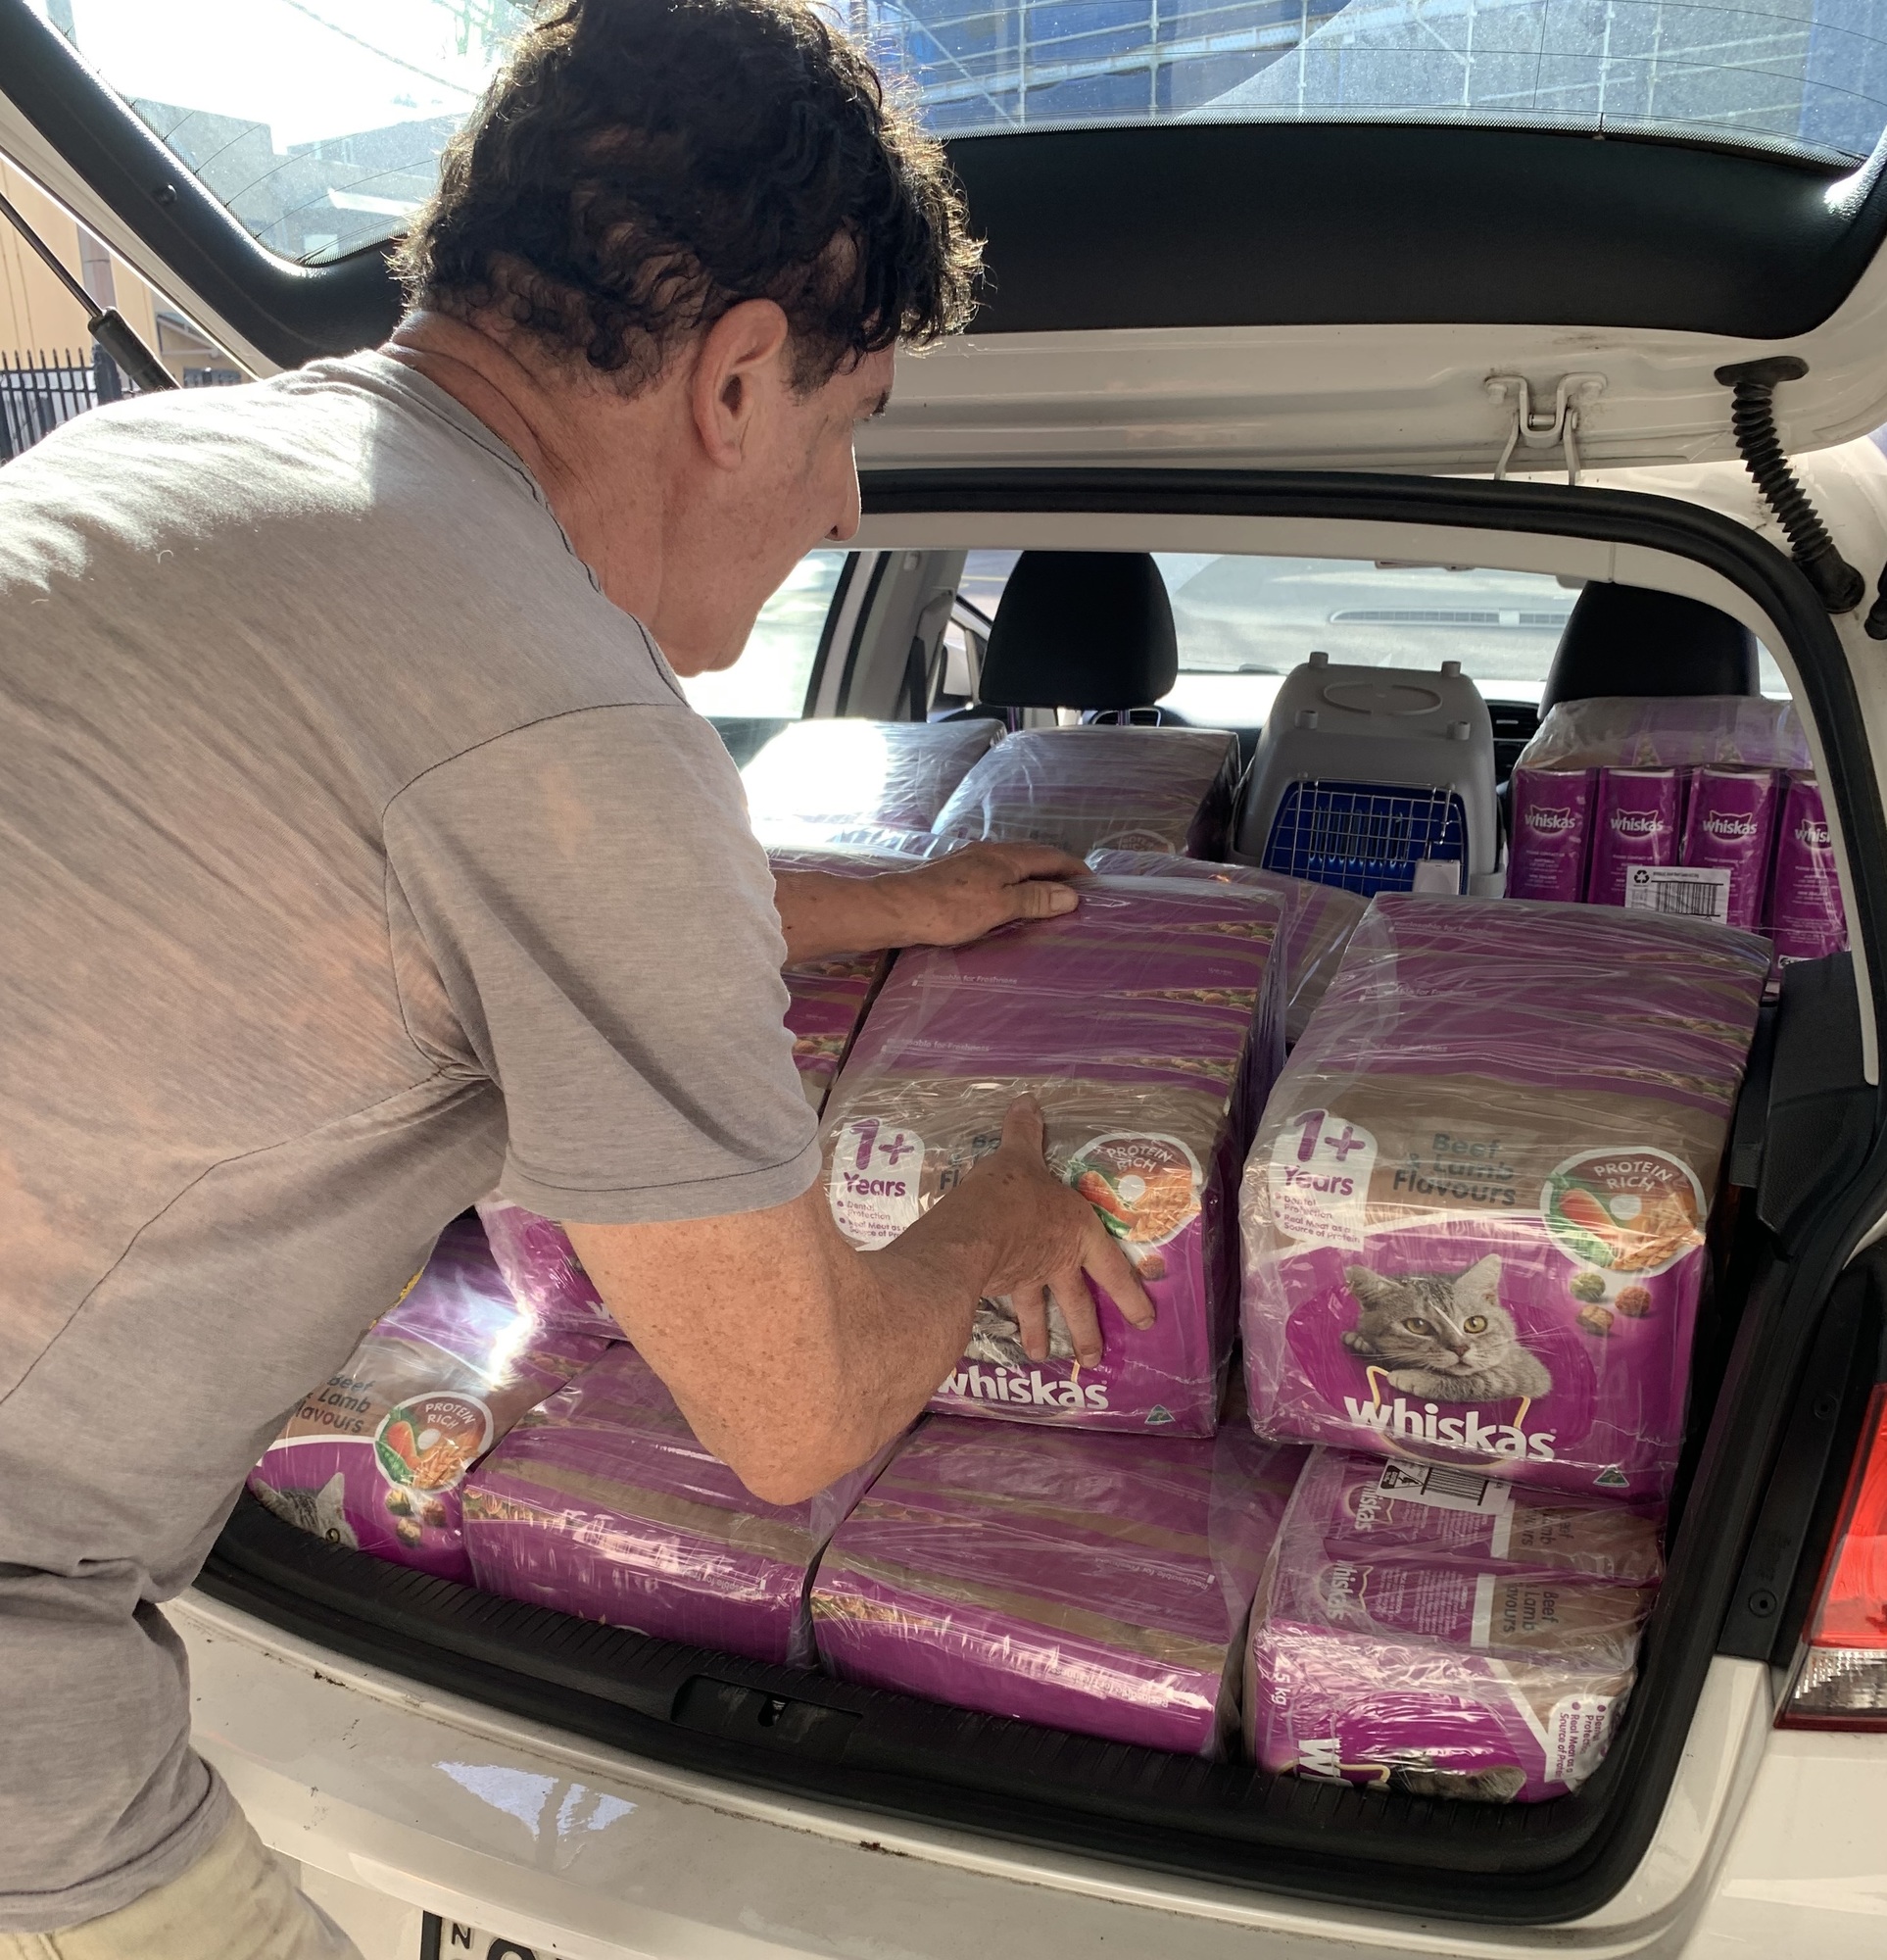 A person loading their car with Whiskas